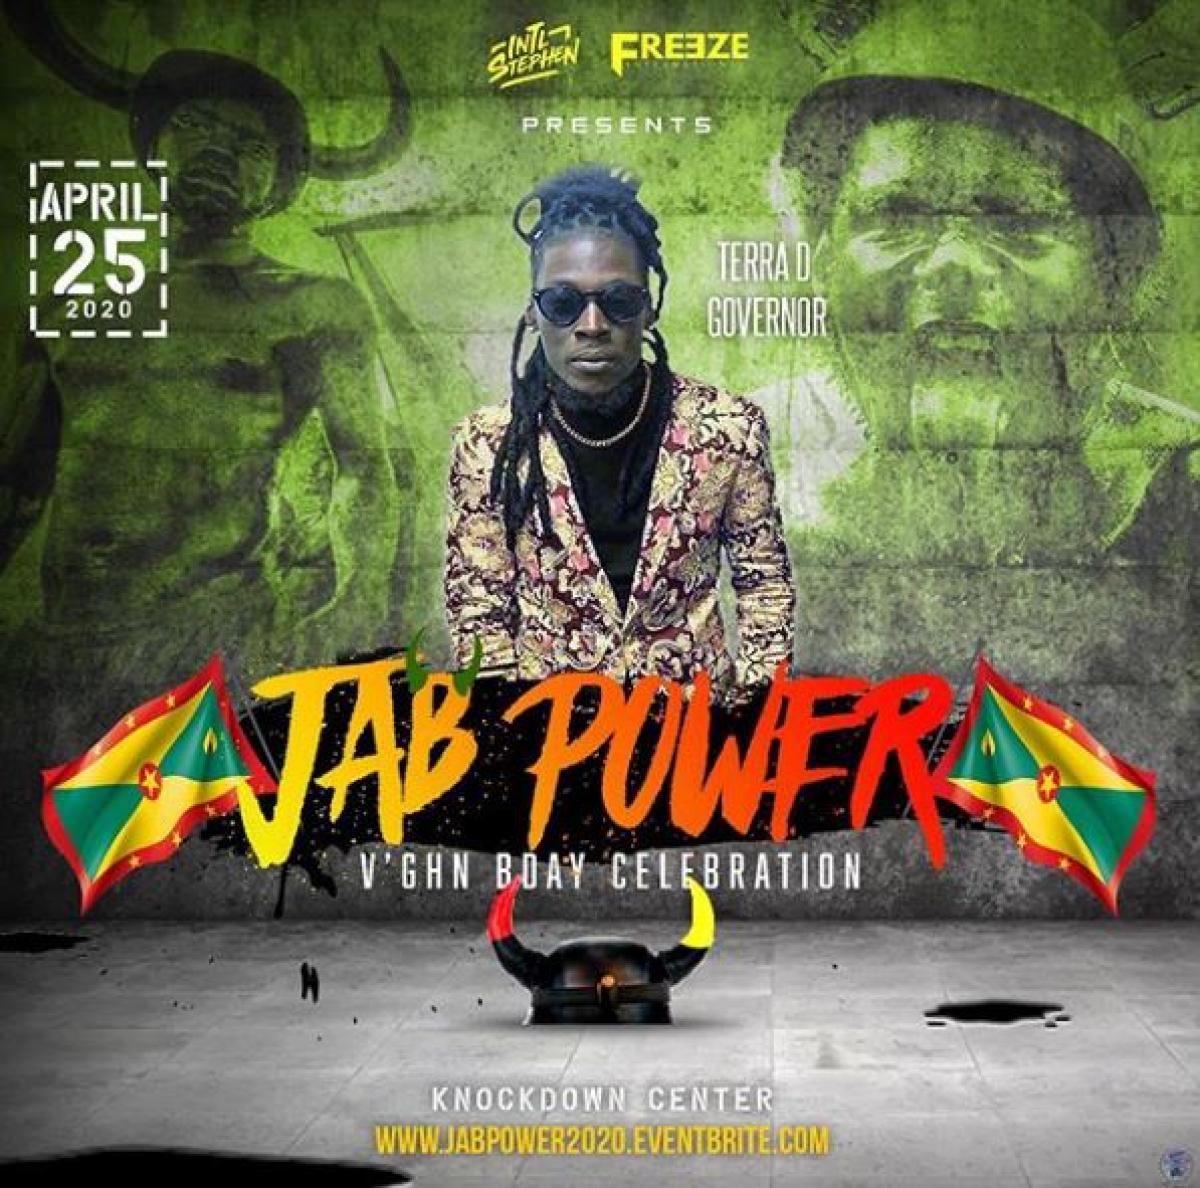 Jab Power flyer or graphic.